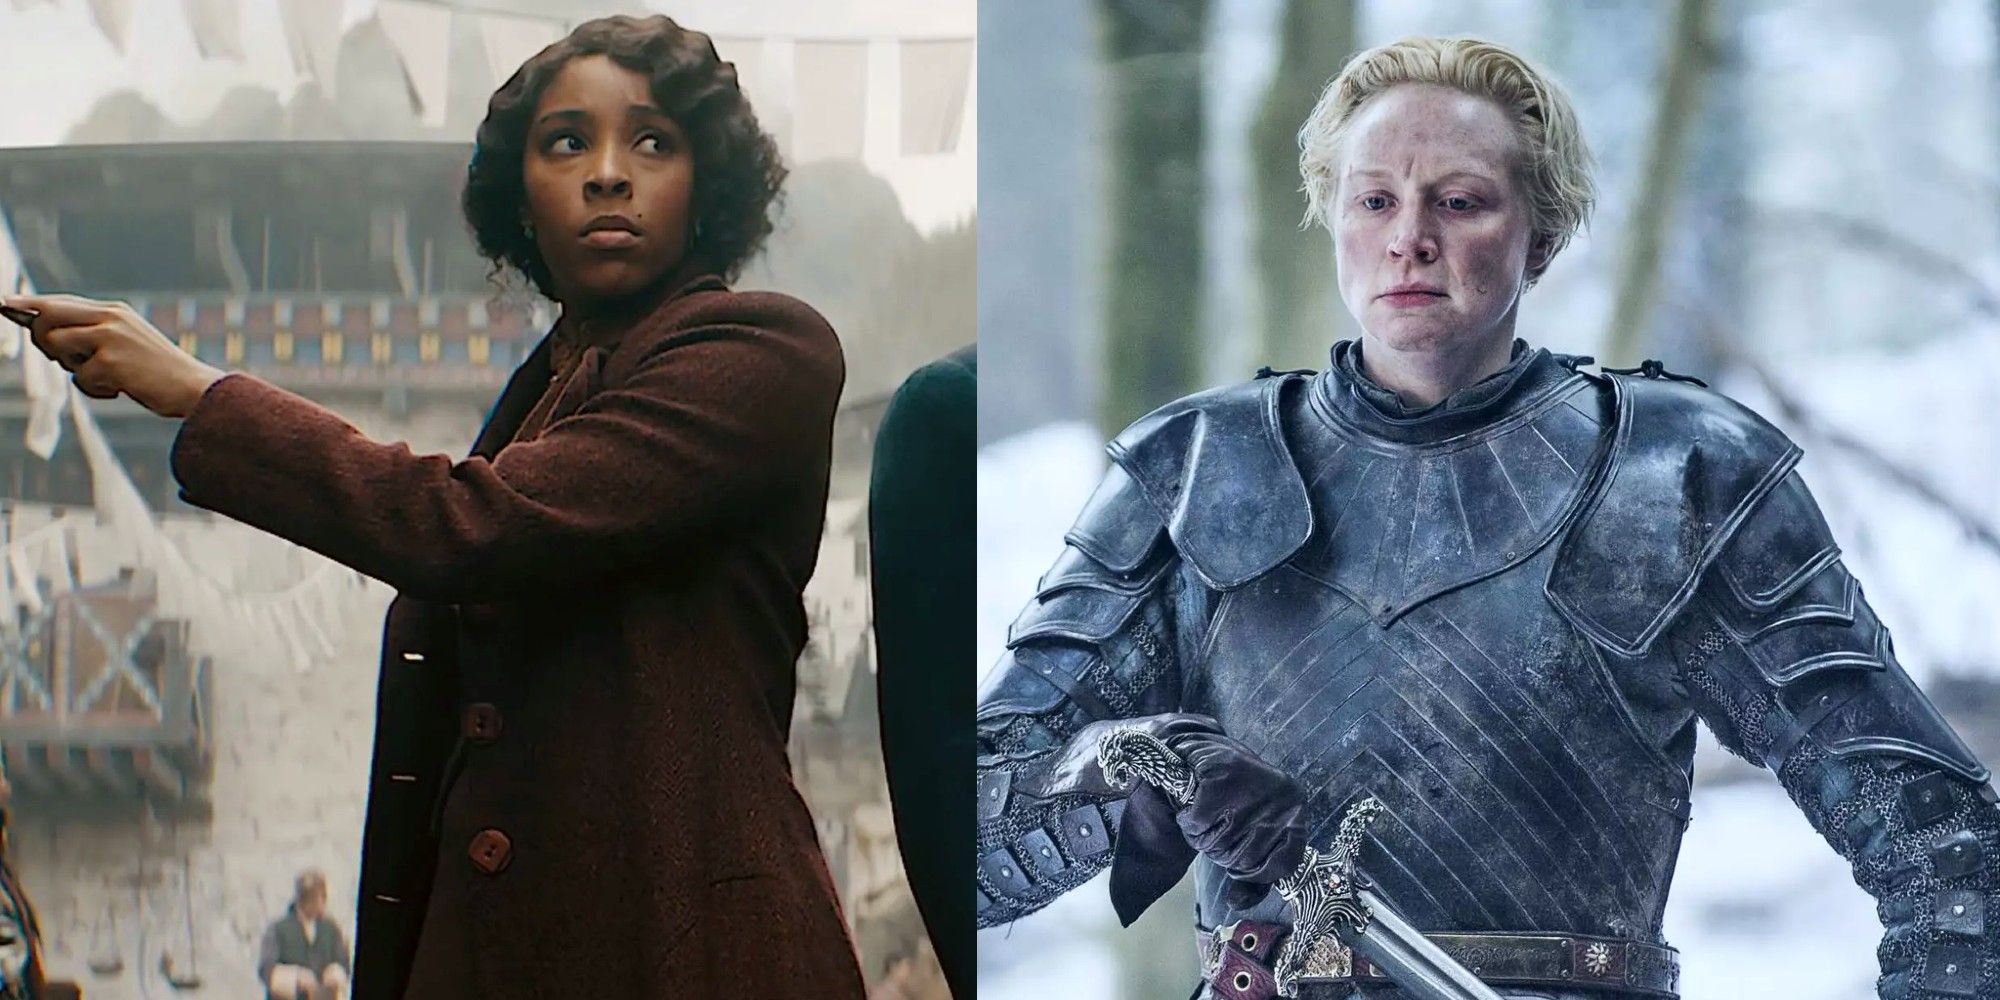 Lally hicks and Brienne of Tarth